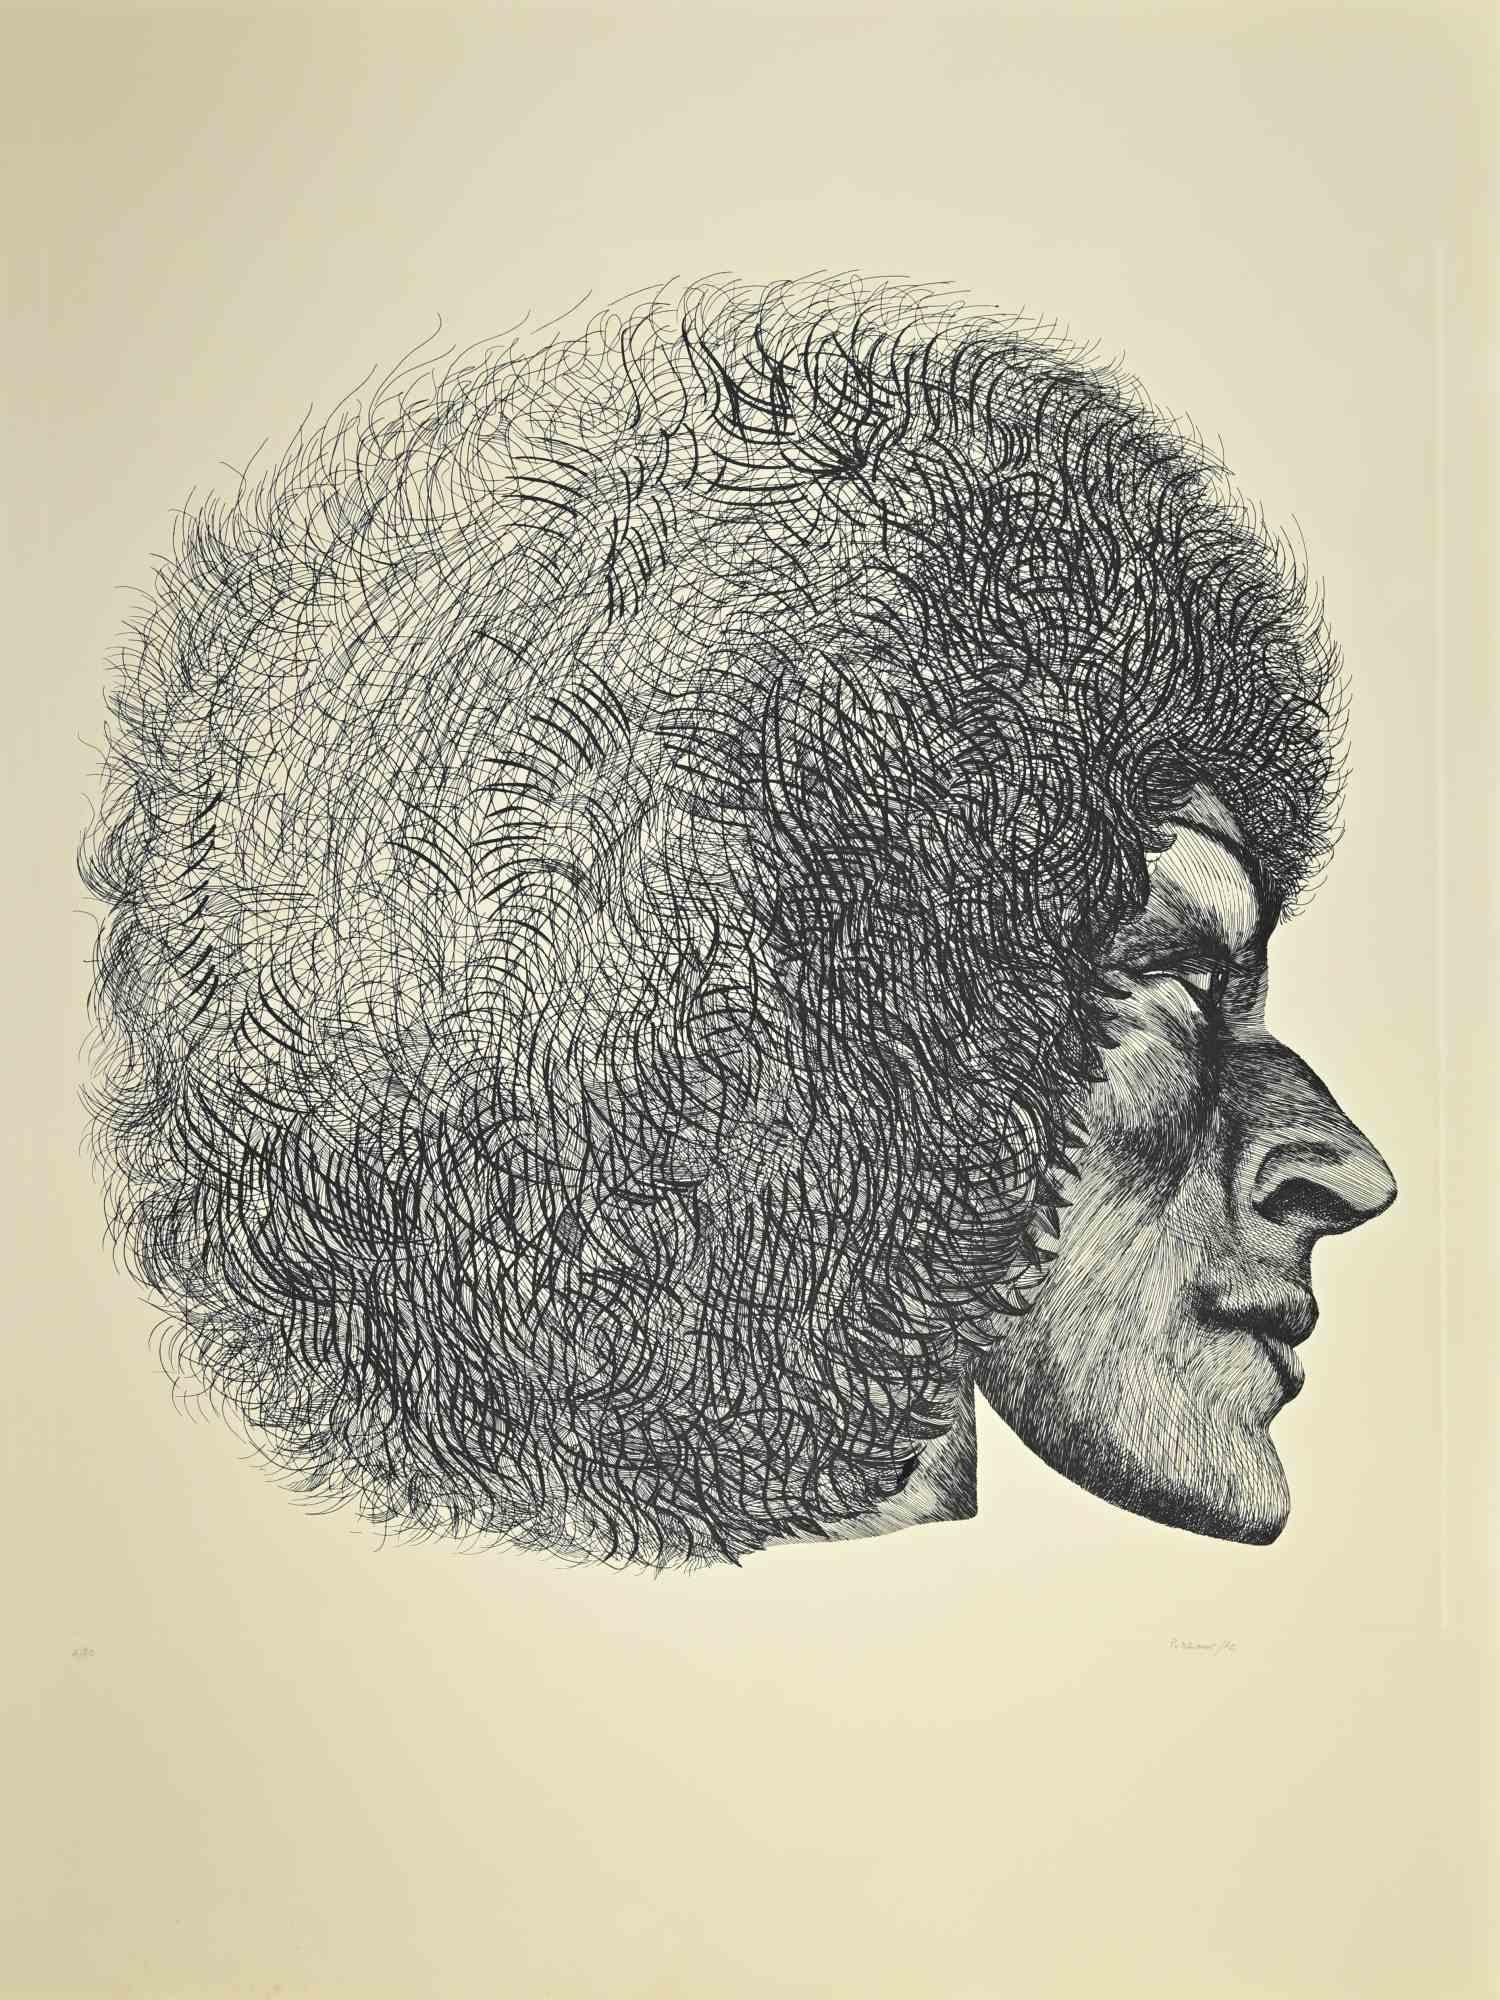 Profile is an original contemporary artwork realized by Giacomo Porzano in 1972.

Hand signed, dated and numbered by artist with pencil.

Edition of 4/50.